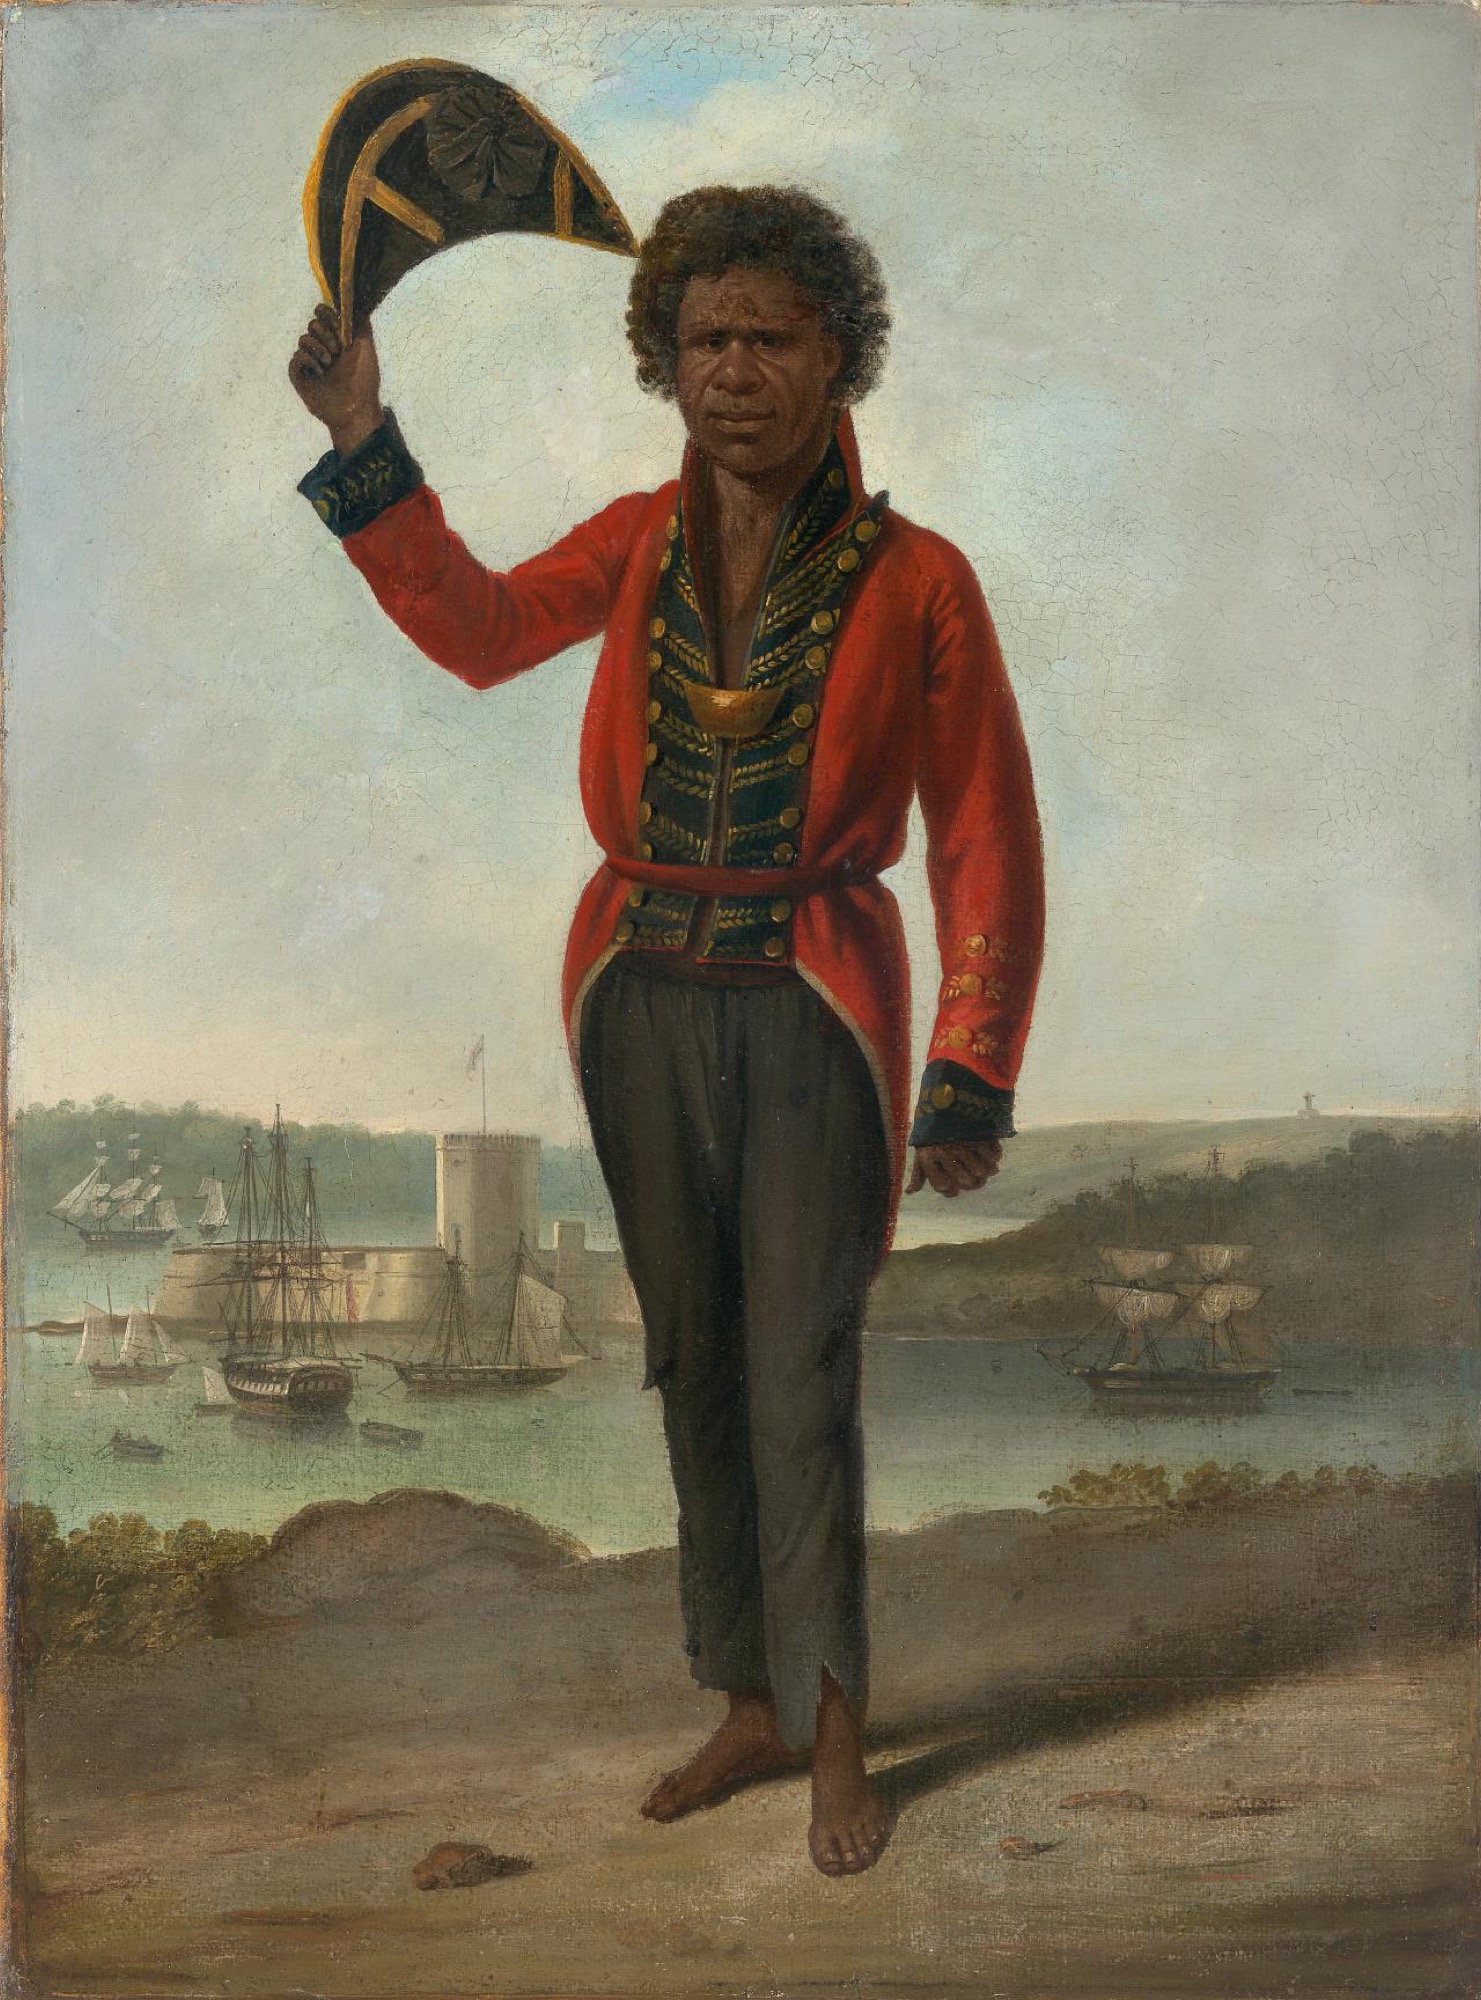 Augustus Earle, <em>Portrait of Bungaree, a native of New South Wales c. 1826</em>, oil on canvas, 68.5 x 50.5 cm, Rex Nan Kivell Collection: National Library of Australia and National Gallery of Australia, Canberra (NGA TEMP.319).